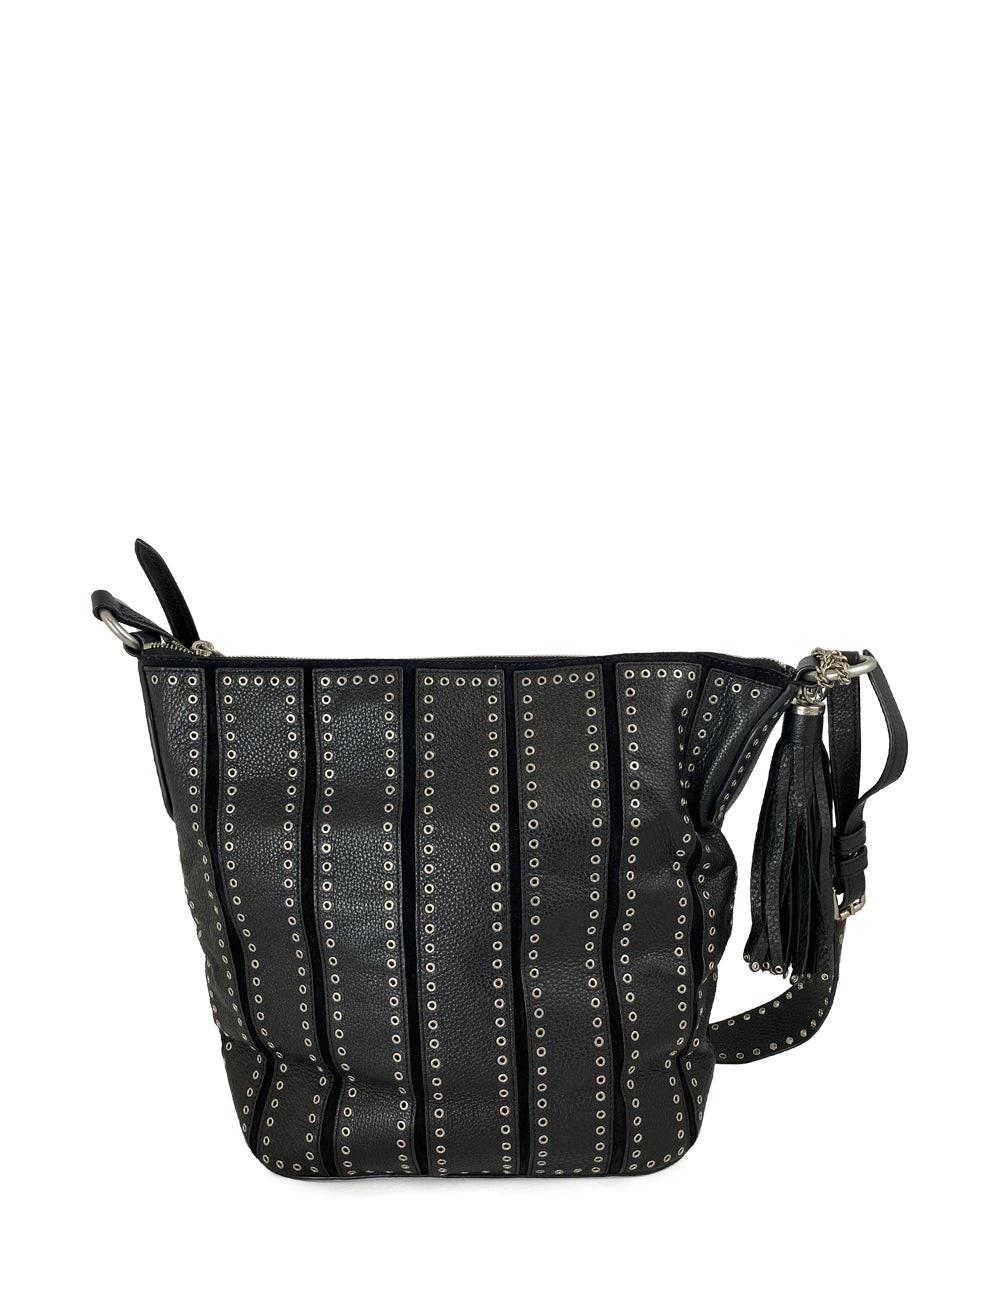 Black leather silver-eyelets stripe Michael Kors handbag, with tassel chain detail. Interior includes two slide pockets and one zipper pocket on the inside. In excellent condition.

Additional information:
Material: Leather
Hardware: